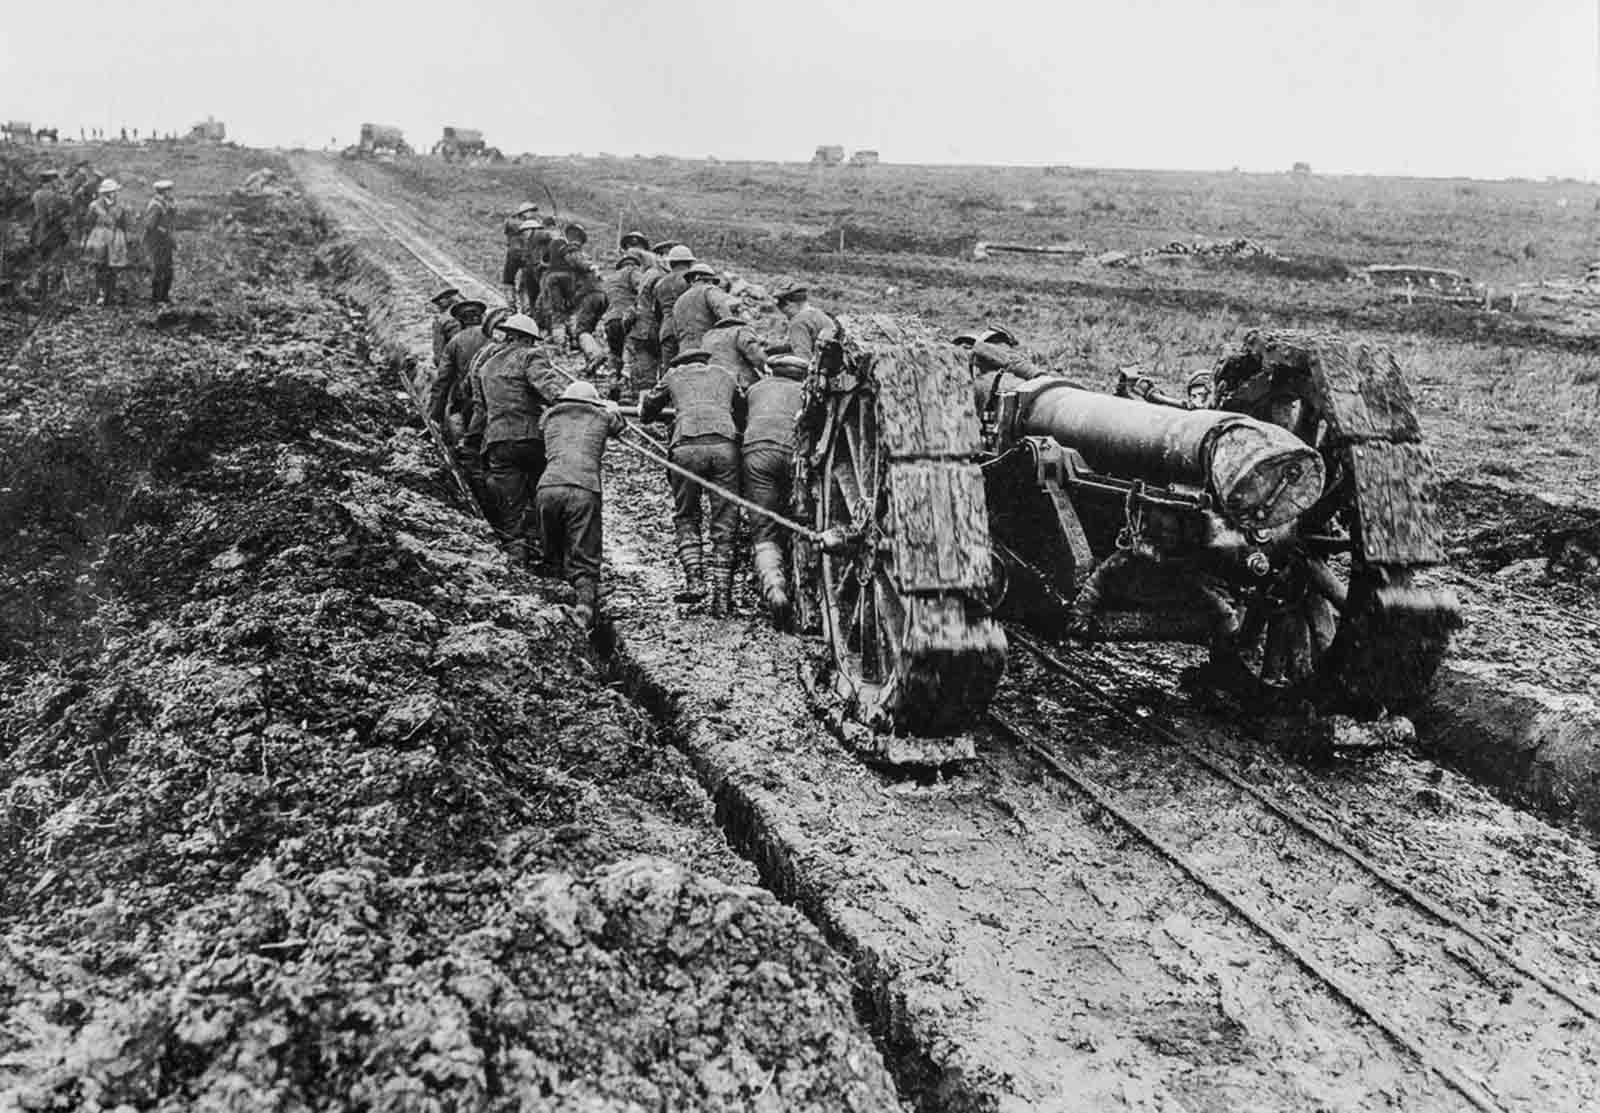 A 6-inch howitzer is hauled through the mud near Pozieres. September, 1916.